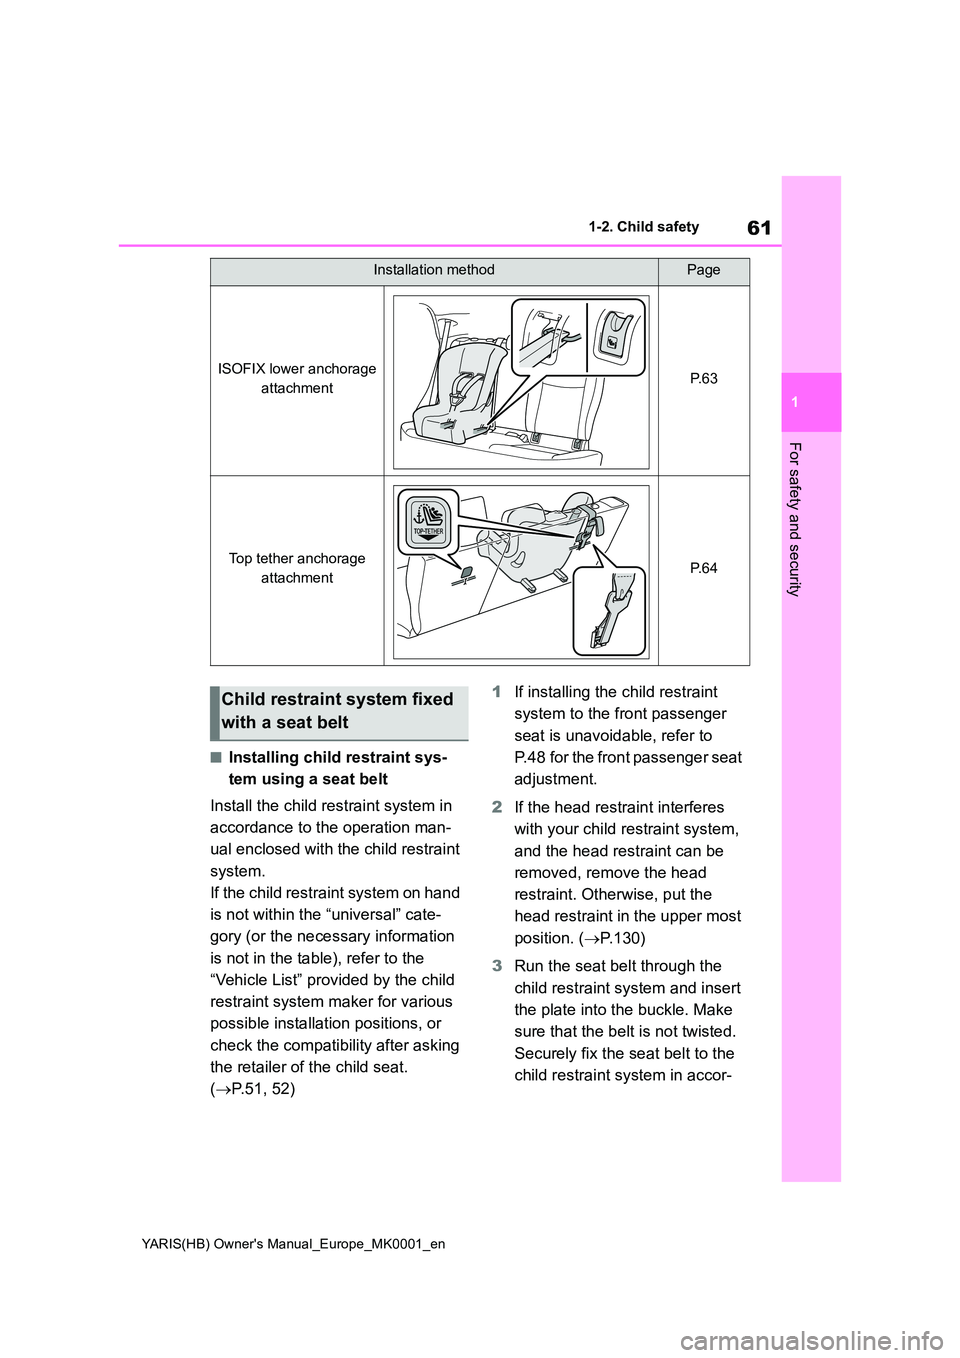 TOYOTA YARIS 2021 Owners Manual 61
1
YARIS(HB) Owners Manual_Europe_MK0001_en
1-2. Child safety
For safety and security
■Installing child restraint sys- 
tem using a seat belt 
Install the child restraint system in  
accordance t